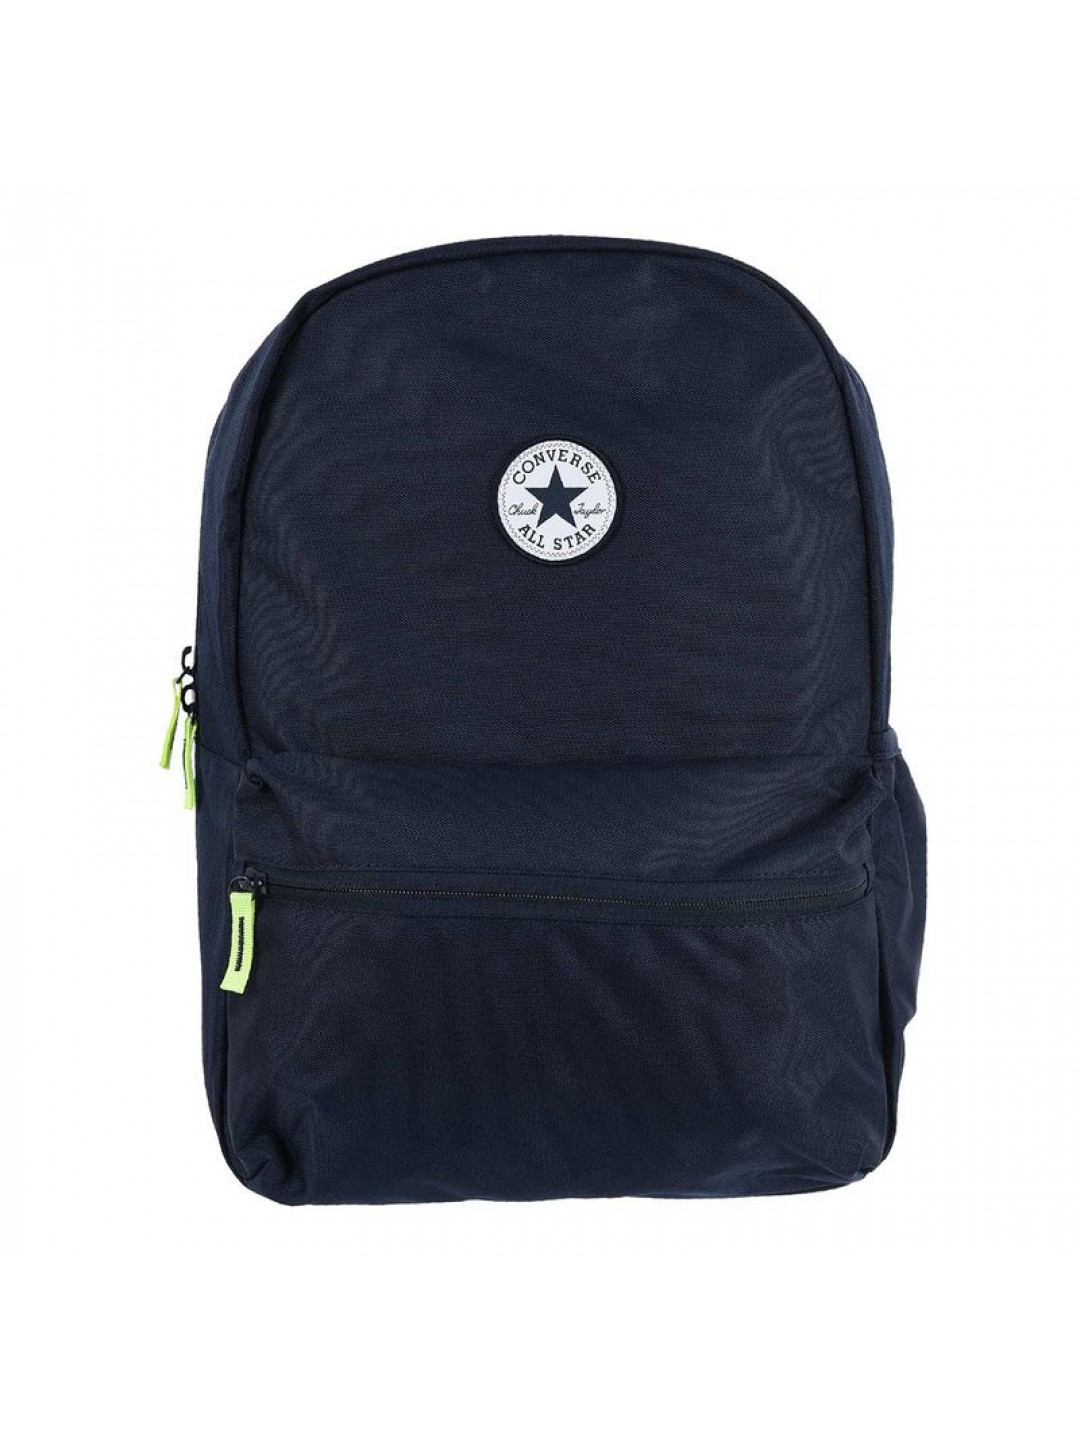 Converse chuck patch backpack o s